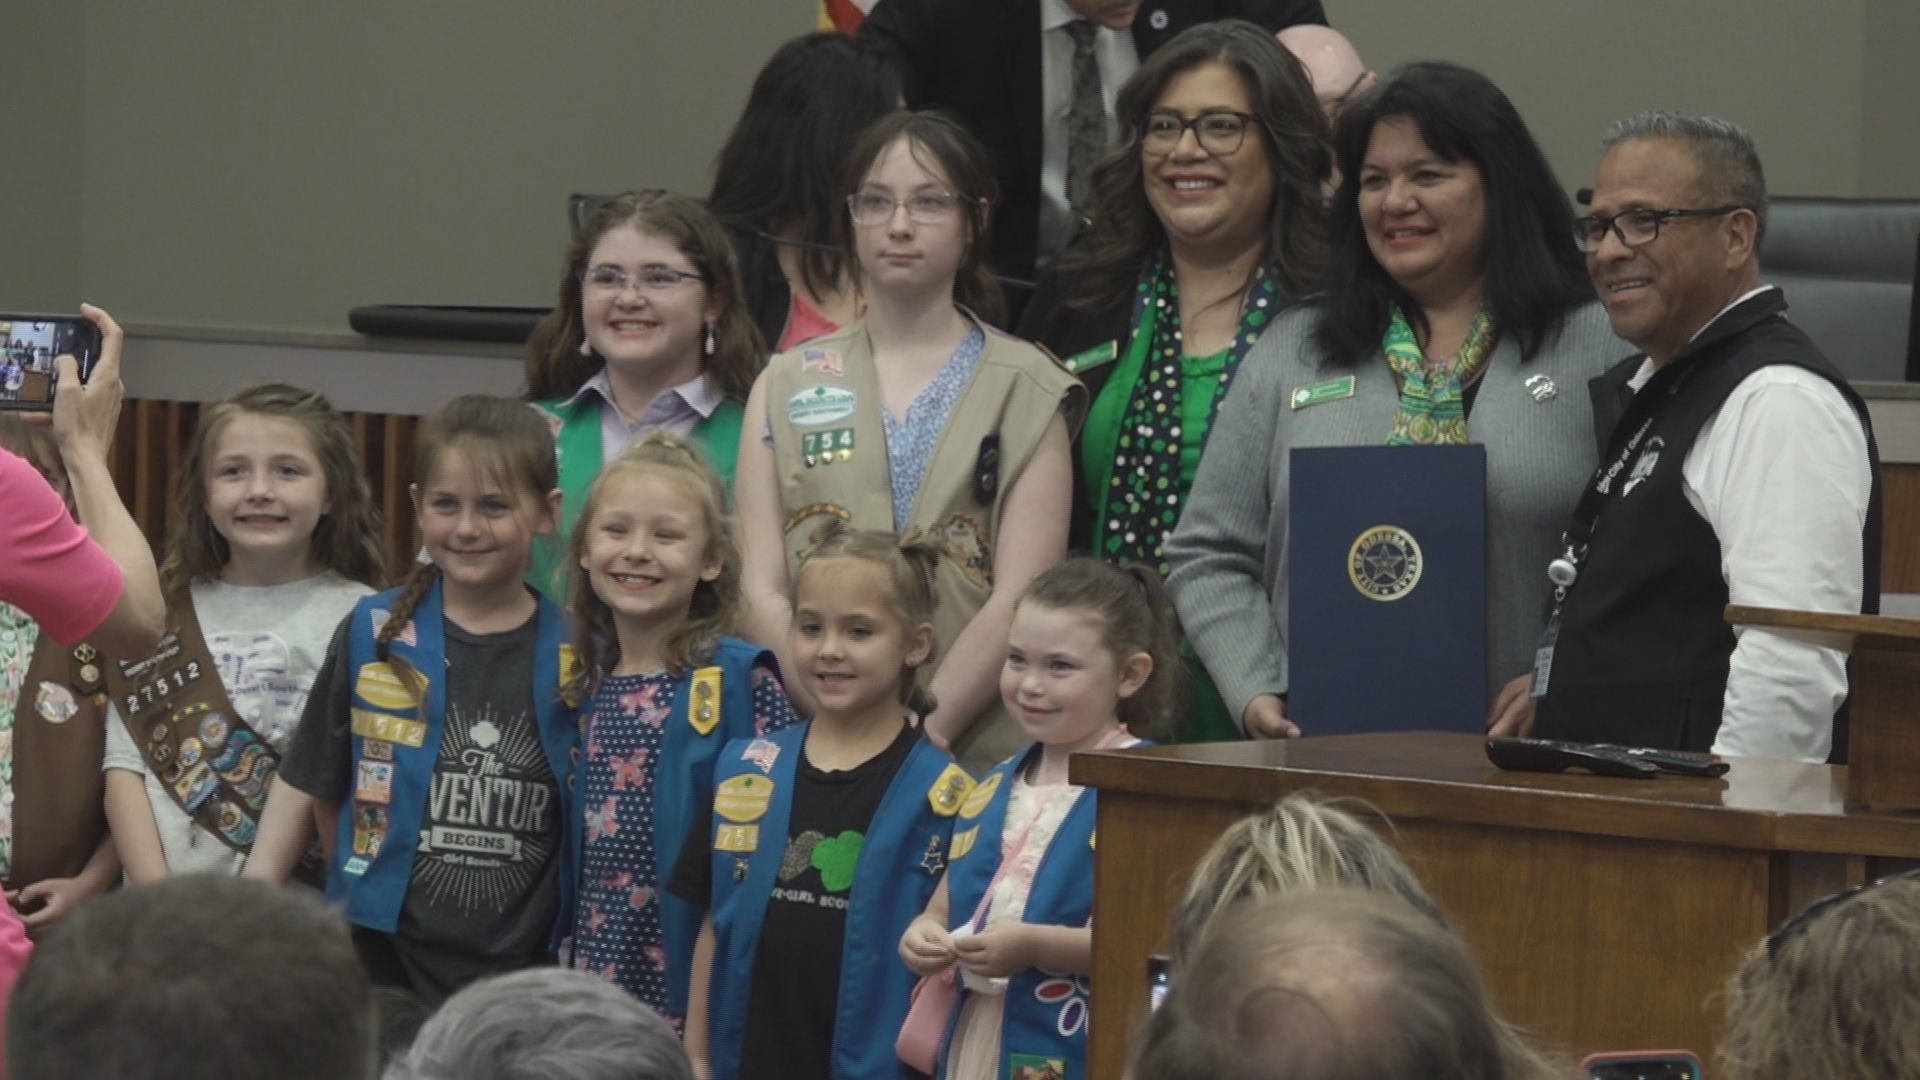 The Girl Scouts organization was founded in 1912. The Girl Scouts of the Desert Southwest currently has about 3,000 girls a part of the chapter.